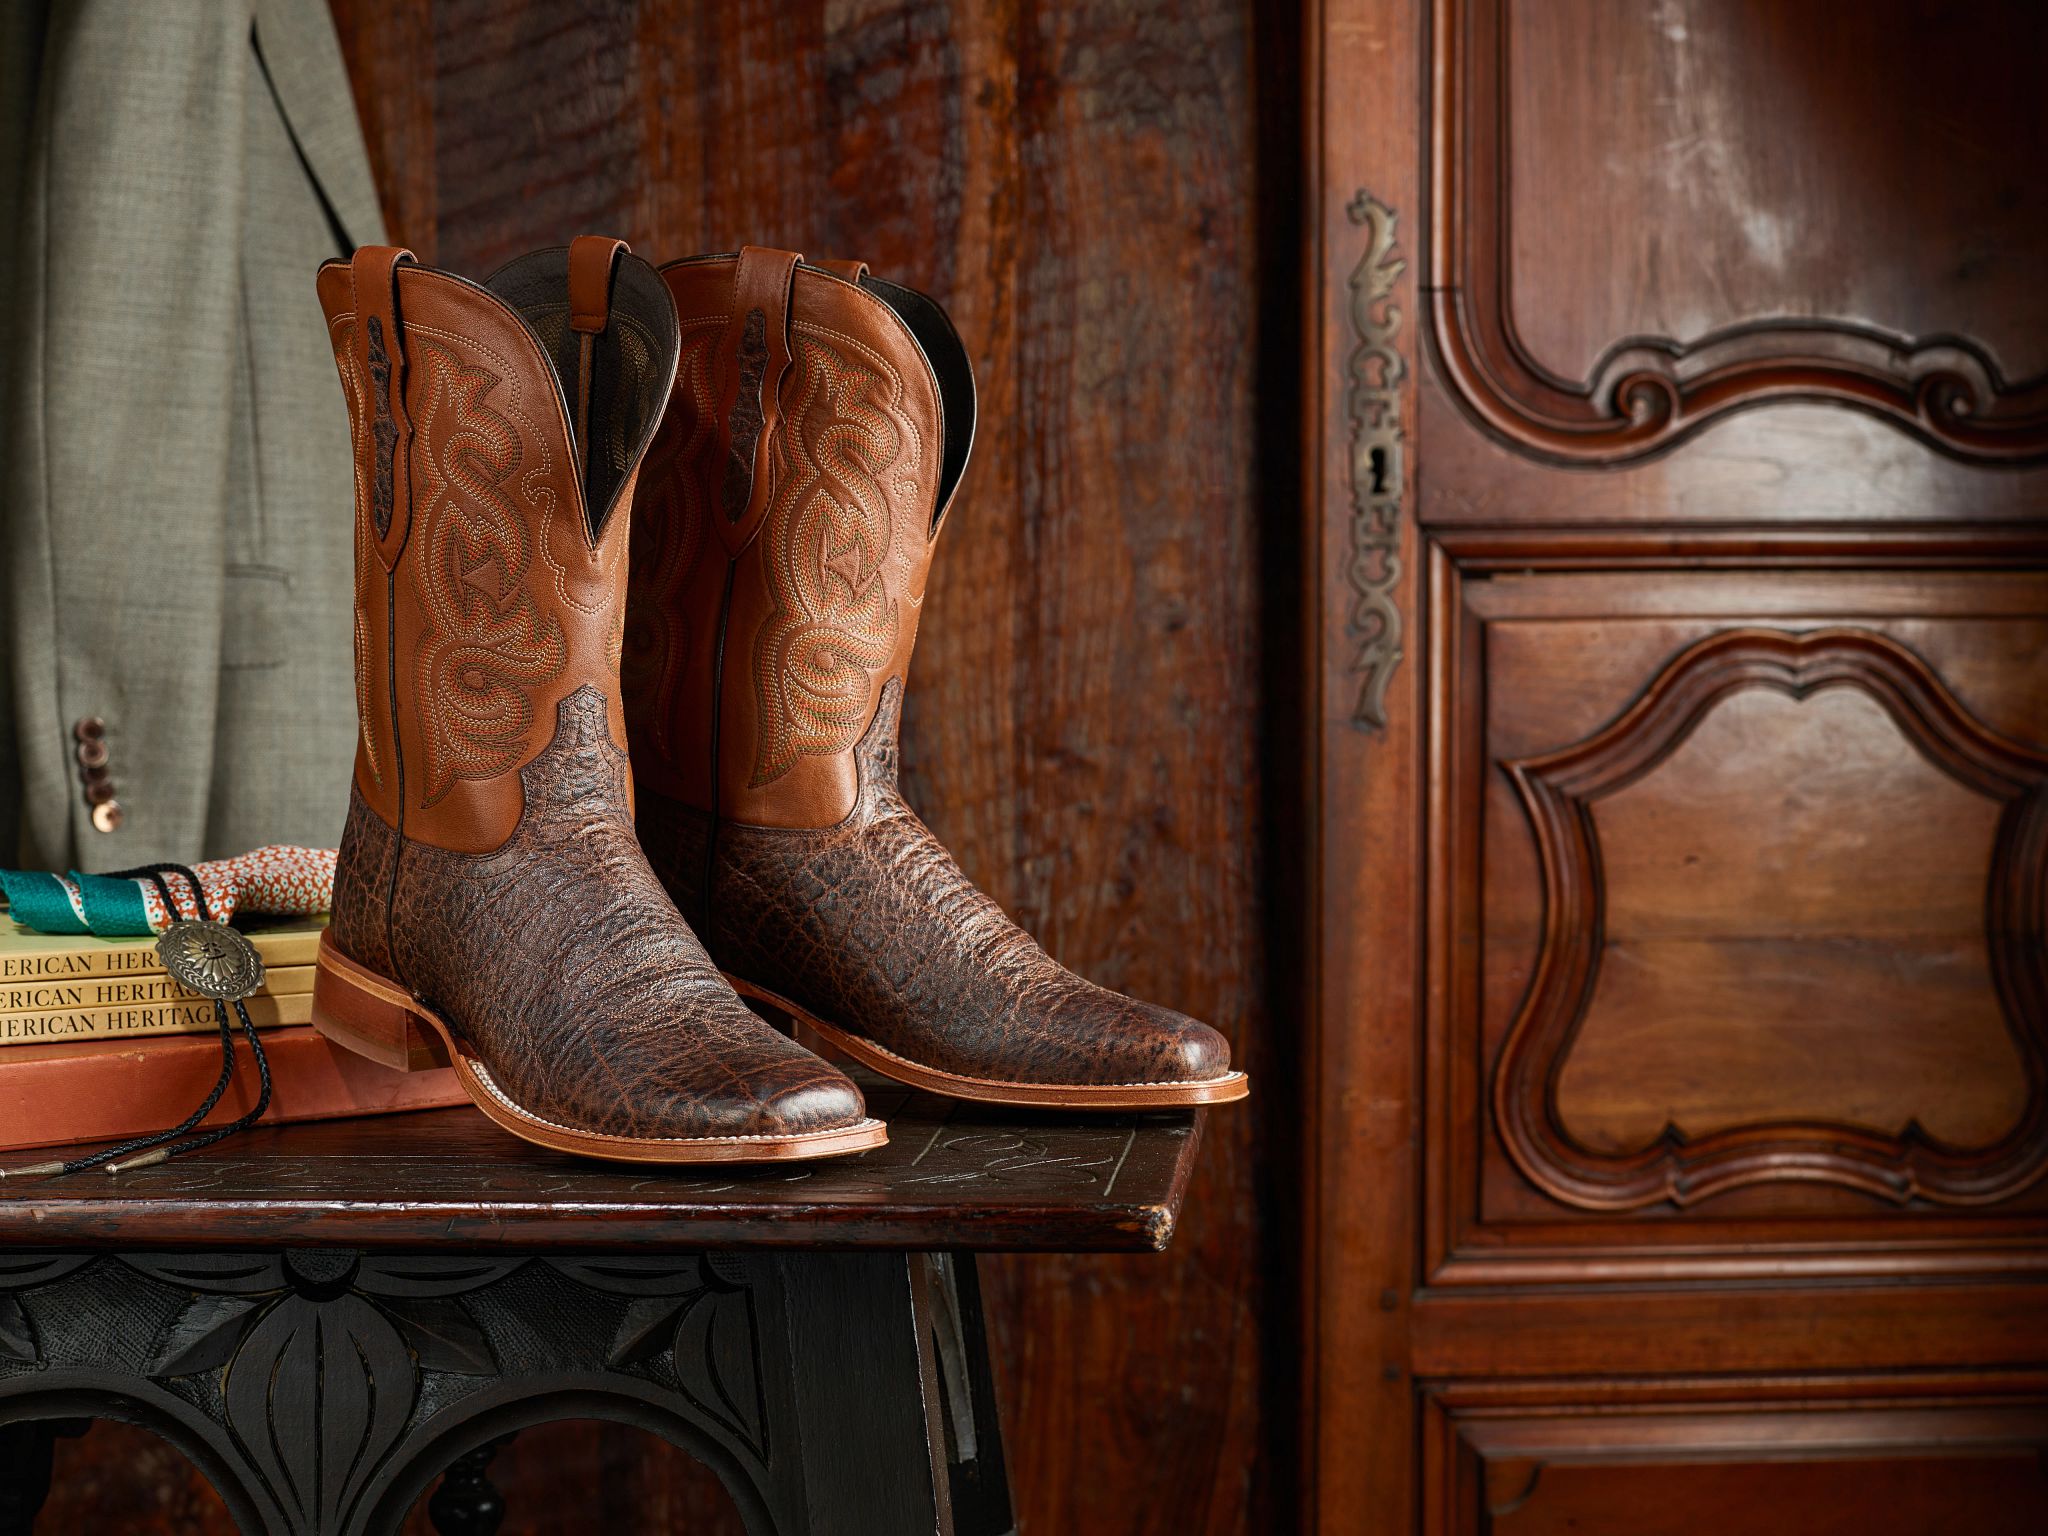 Tony Lama Boots, A Legacy in Bootmaking Since 1911